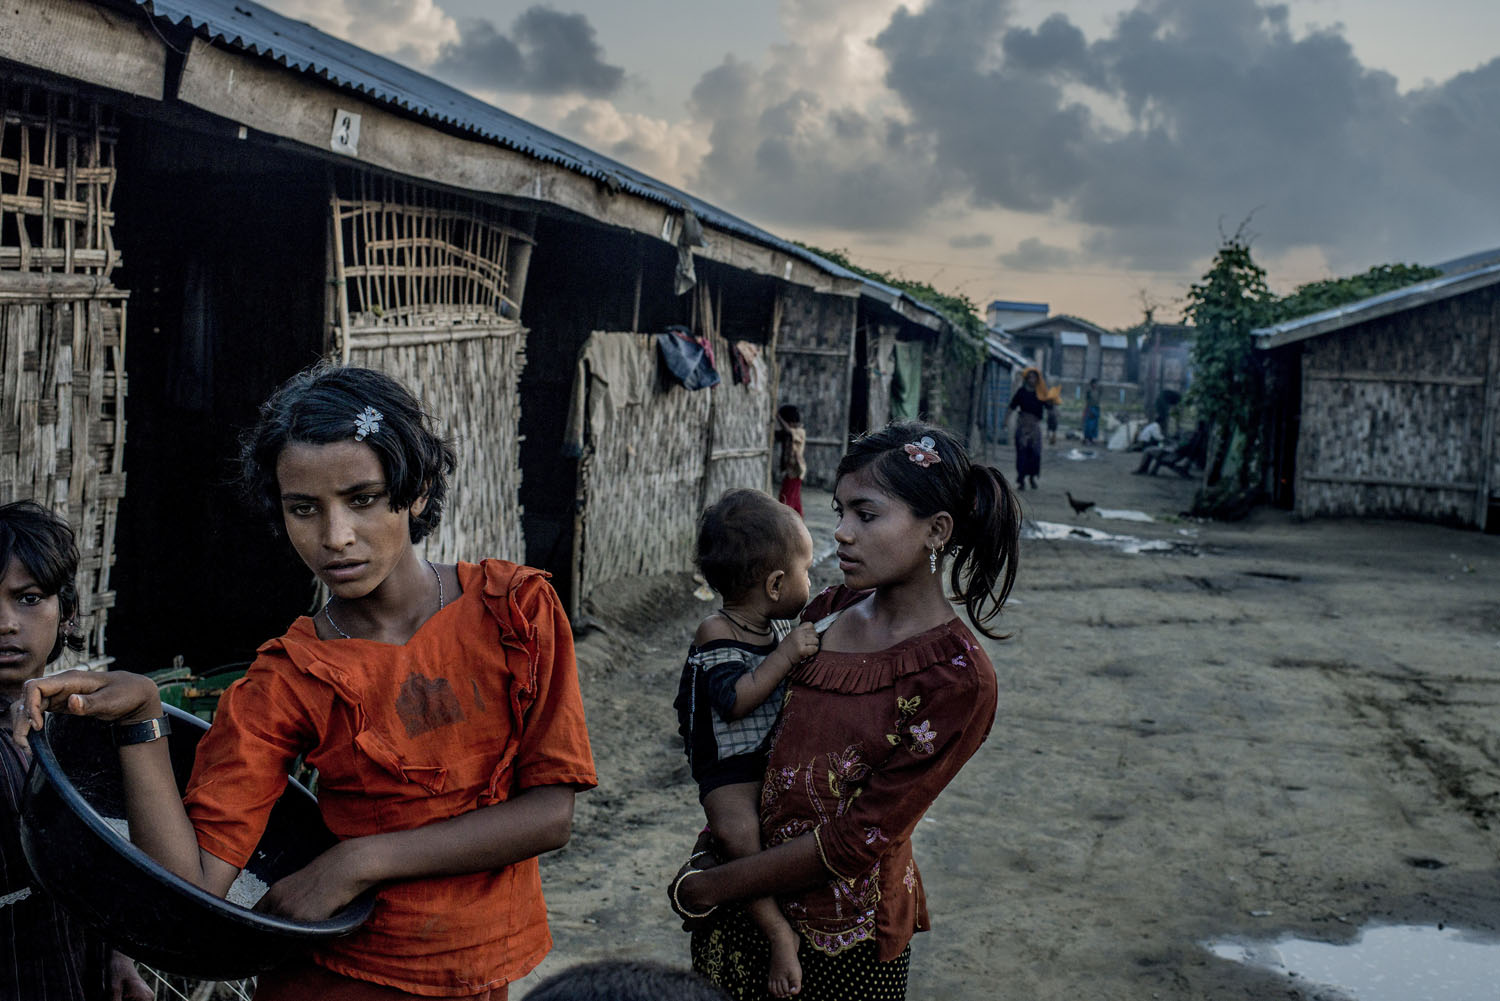 A camp full of Rohingya refugees on the edge of Sittwe, Myanmar.